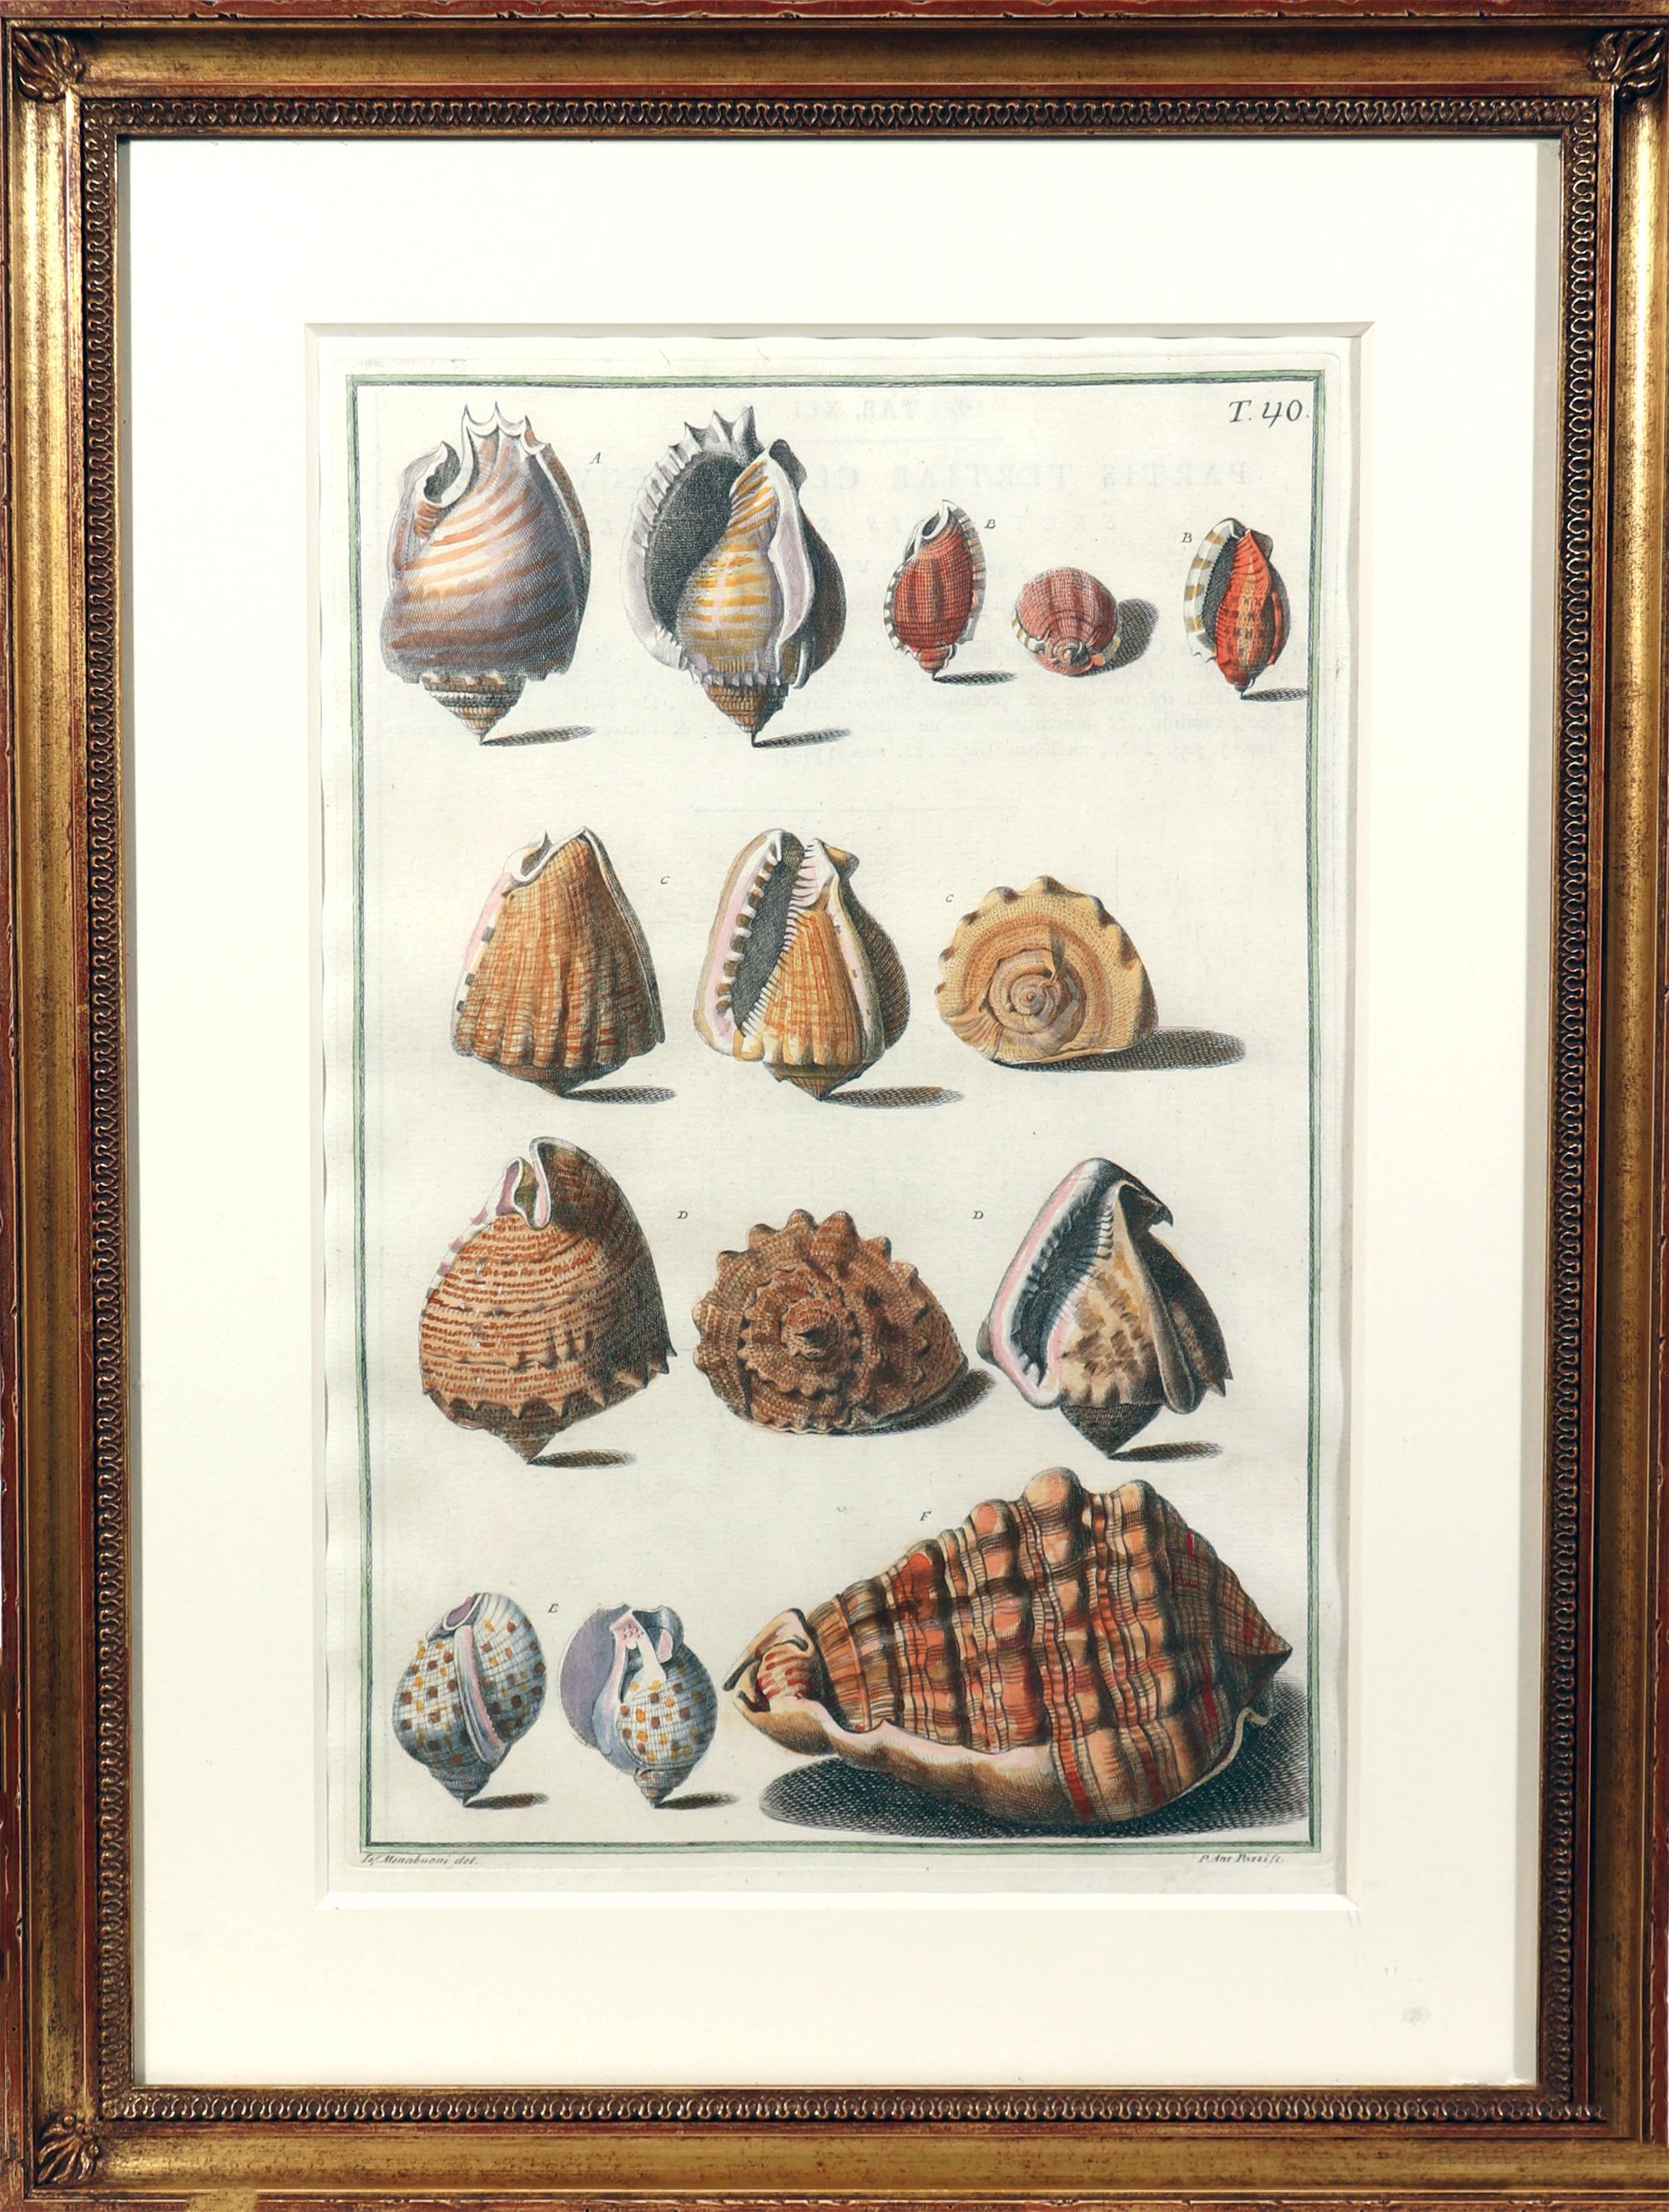 18th-Century Hand-colored Engravings of Sea Shells, 
 Niccolo Gualtieri (1688-1744),
 A Set of Six Framed Engravings,
Circa 1742
 
 The set of six hand-colored engravings display an array of seashells by Niccolo Gualtieri.
 
 
 Provenance: